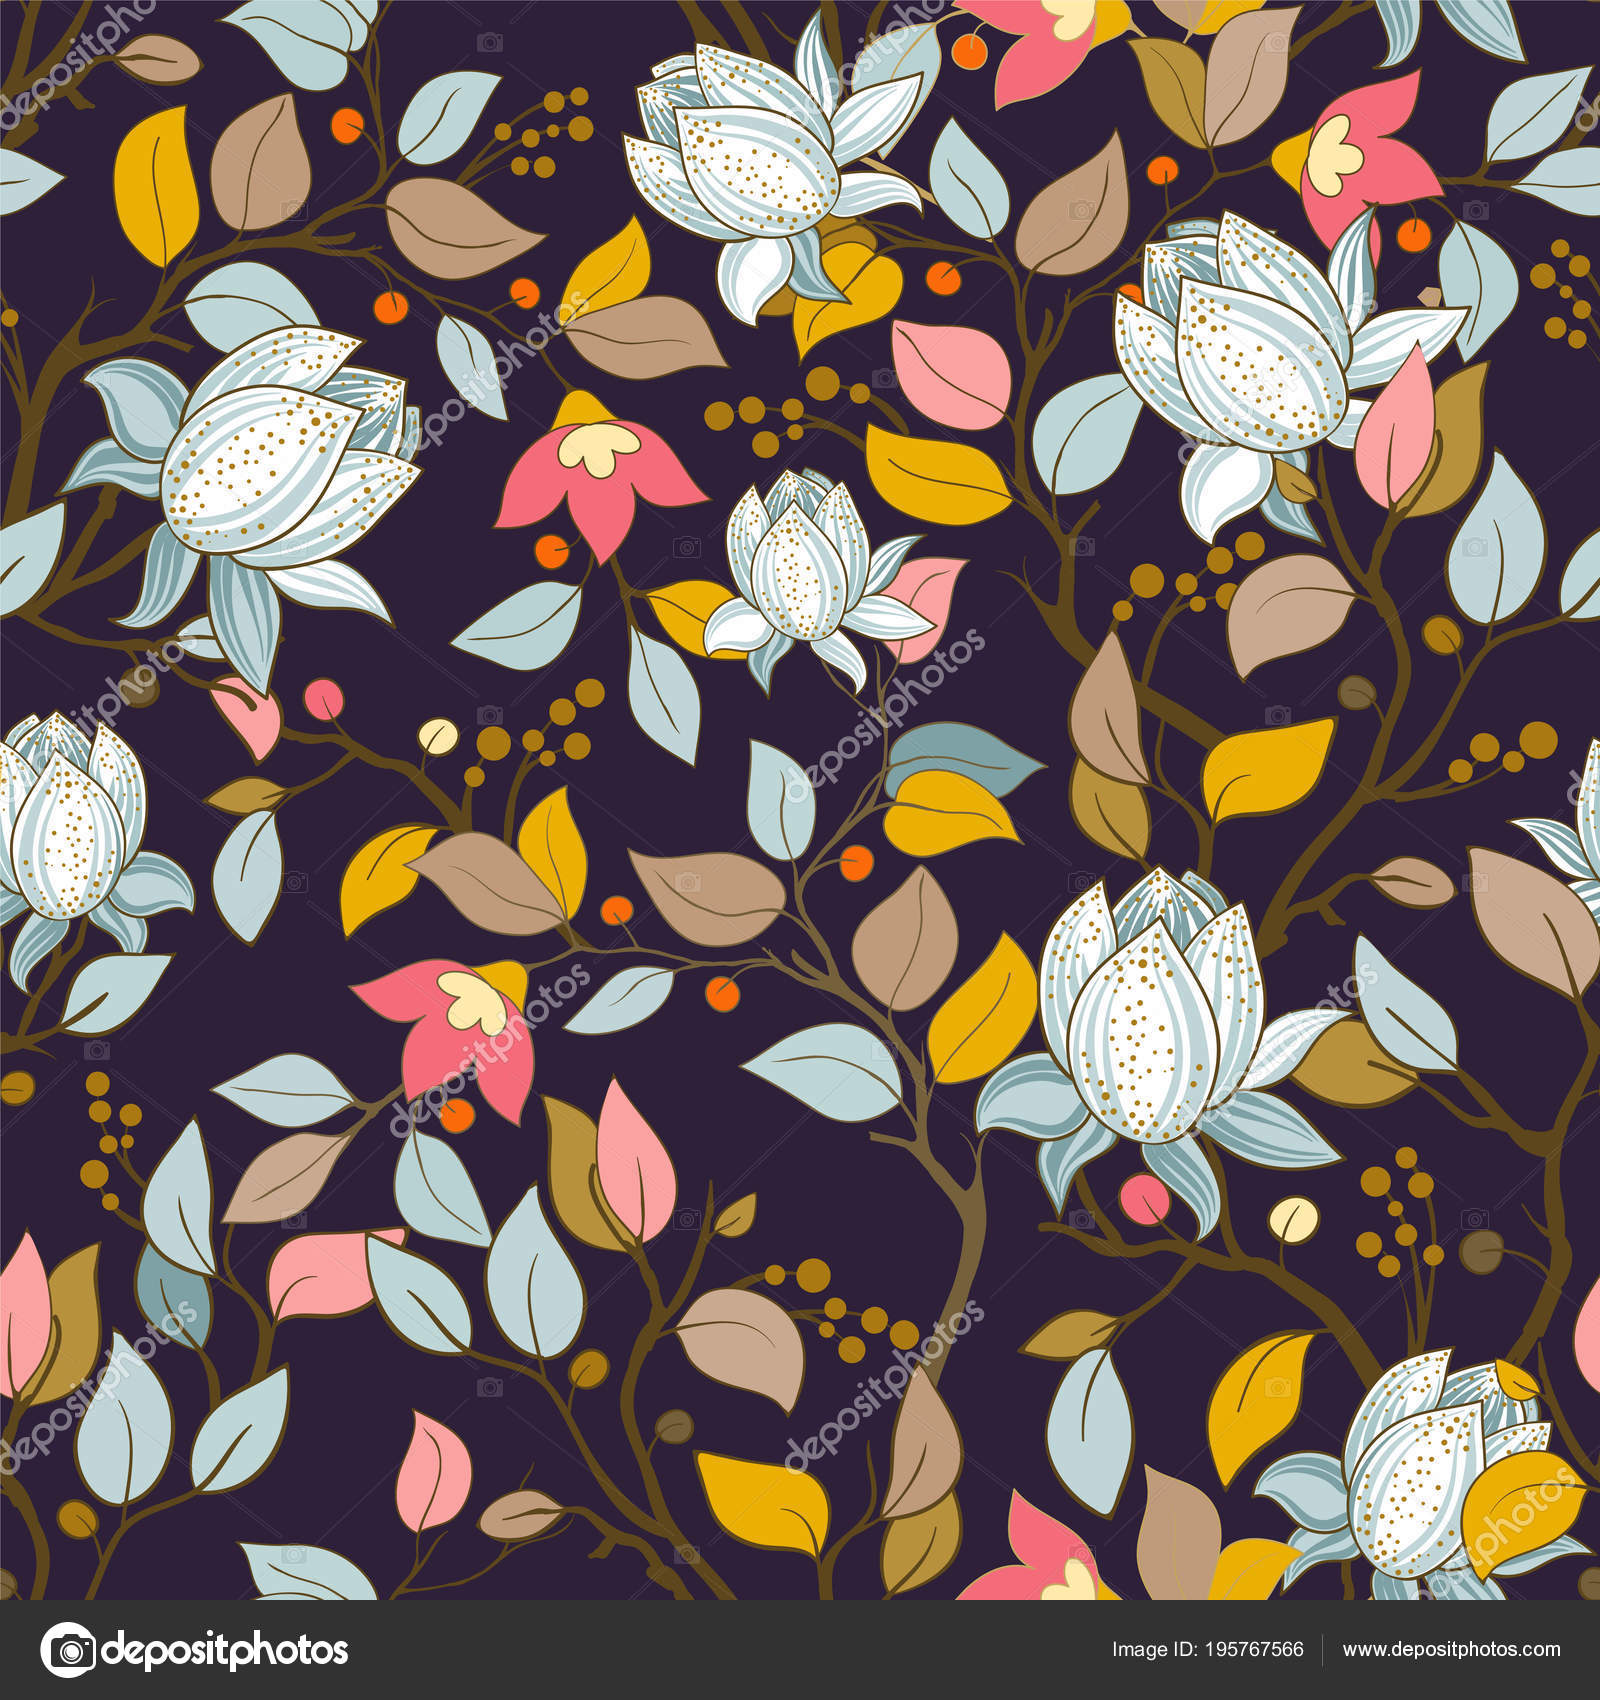 Colorful Floral Vector Pattern - HD Wallpaper 